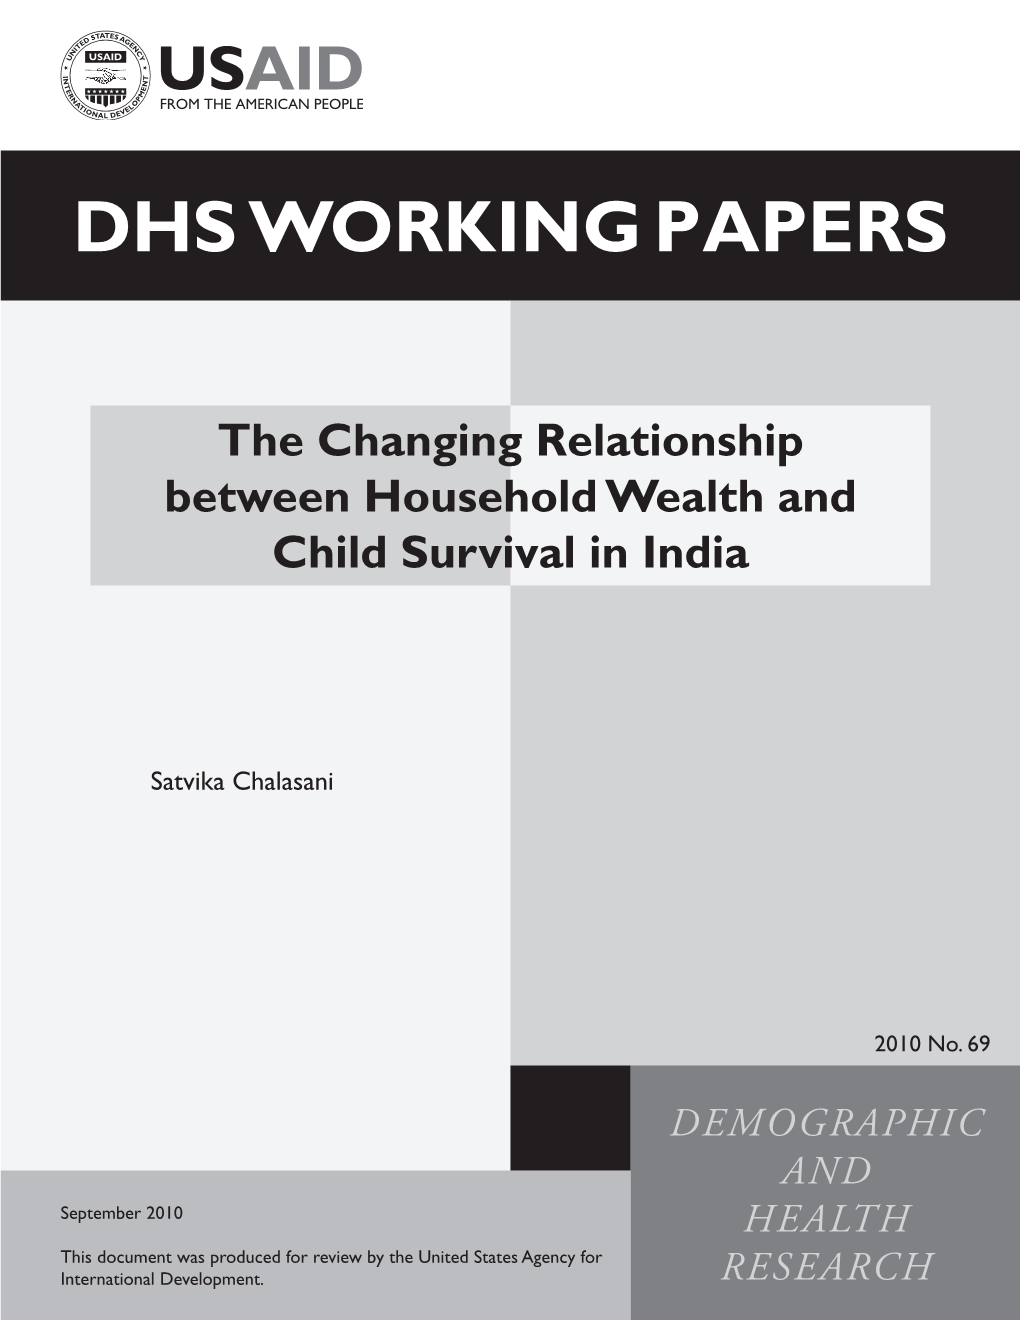 The Changing Relationship Between Household Wealth and Child Survival in India